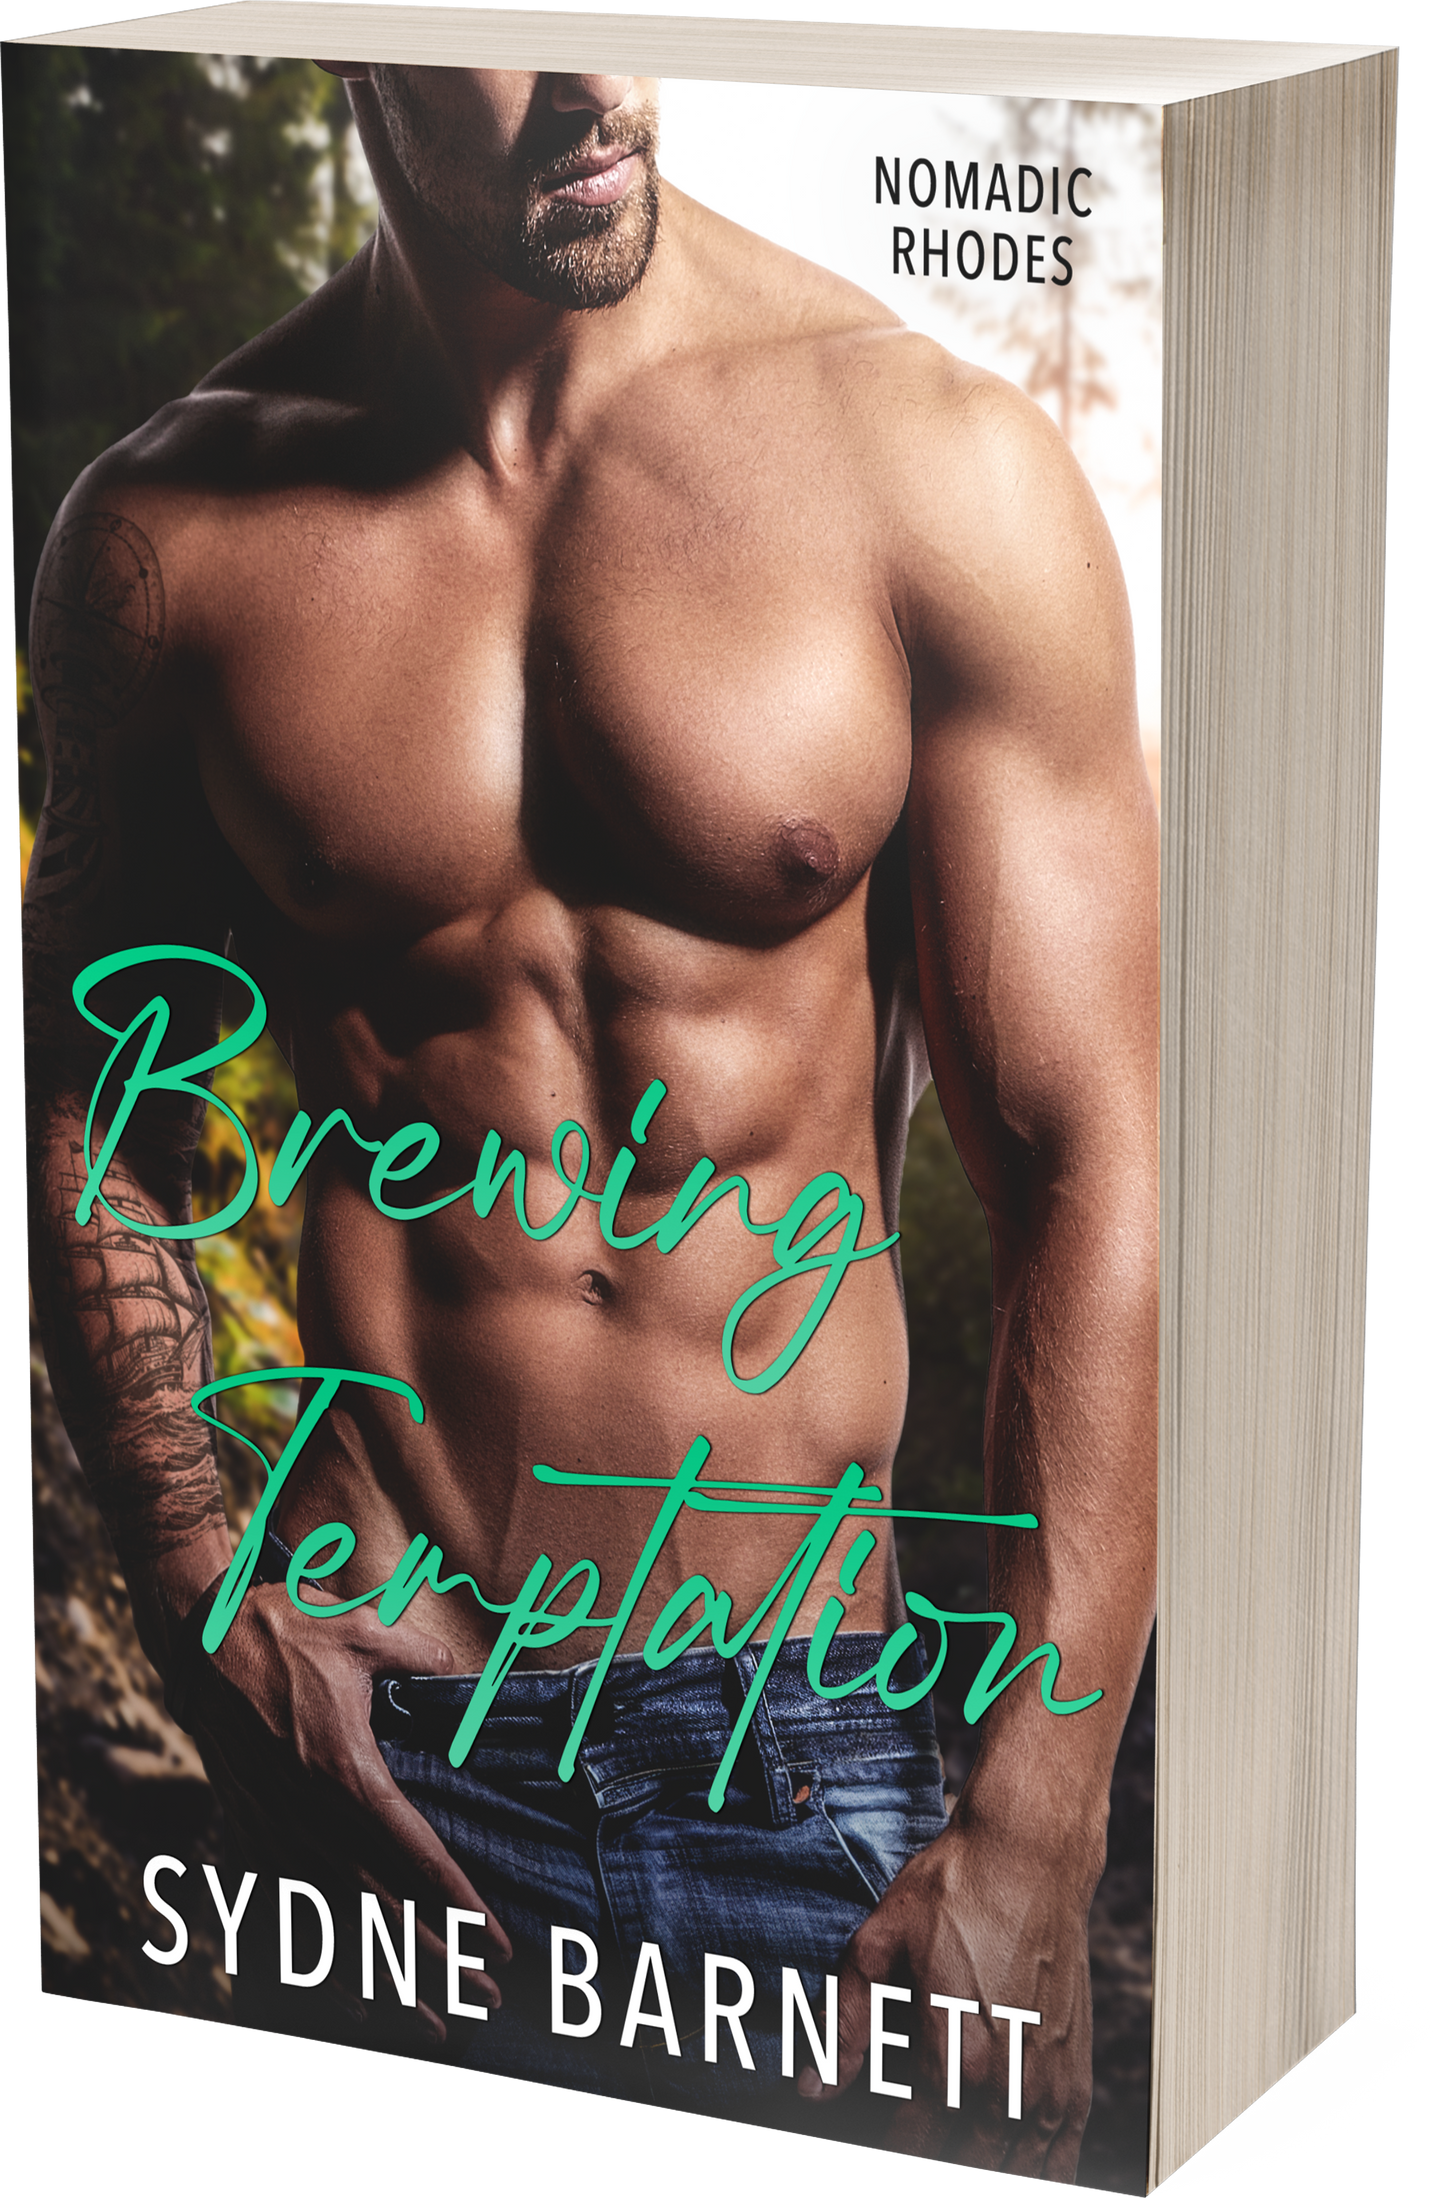 Signed copy of Brewing Temptation